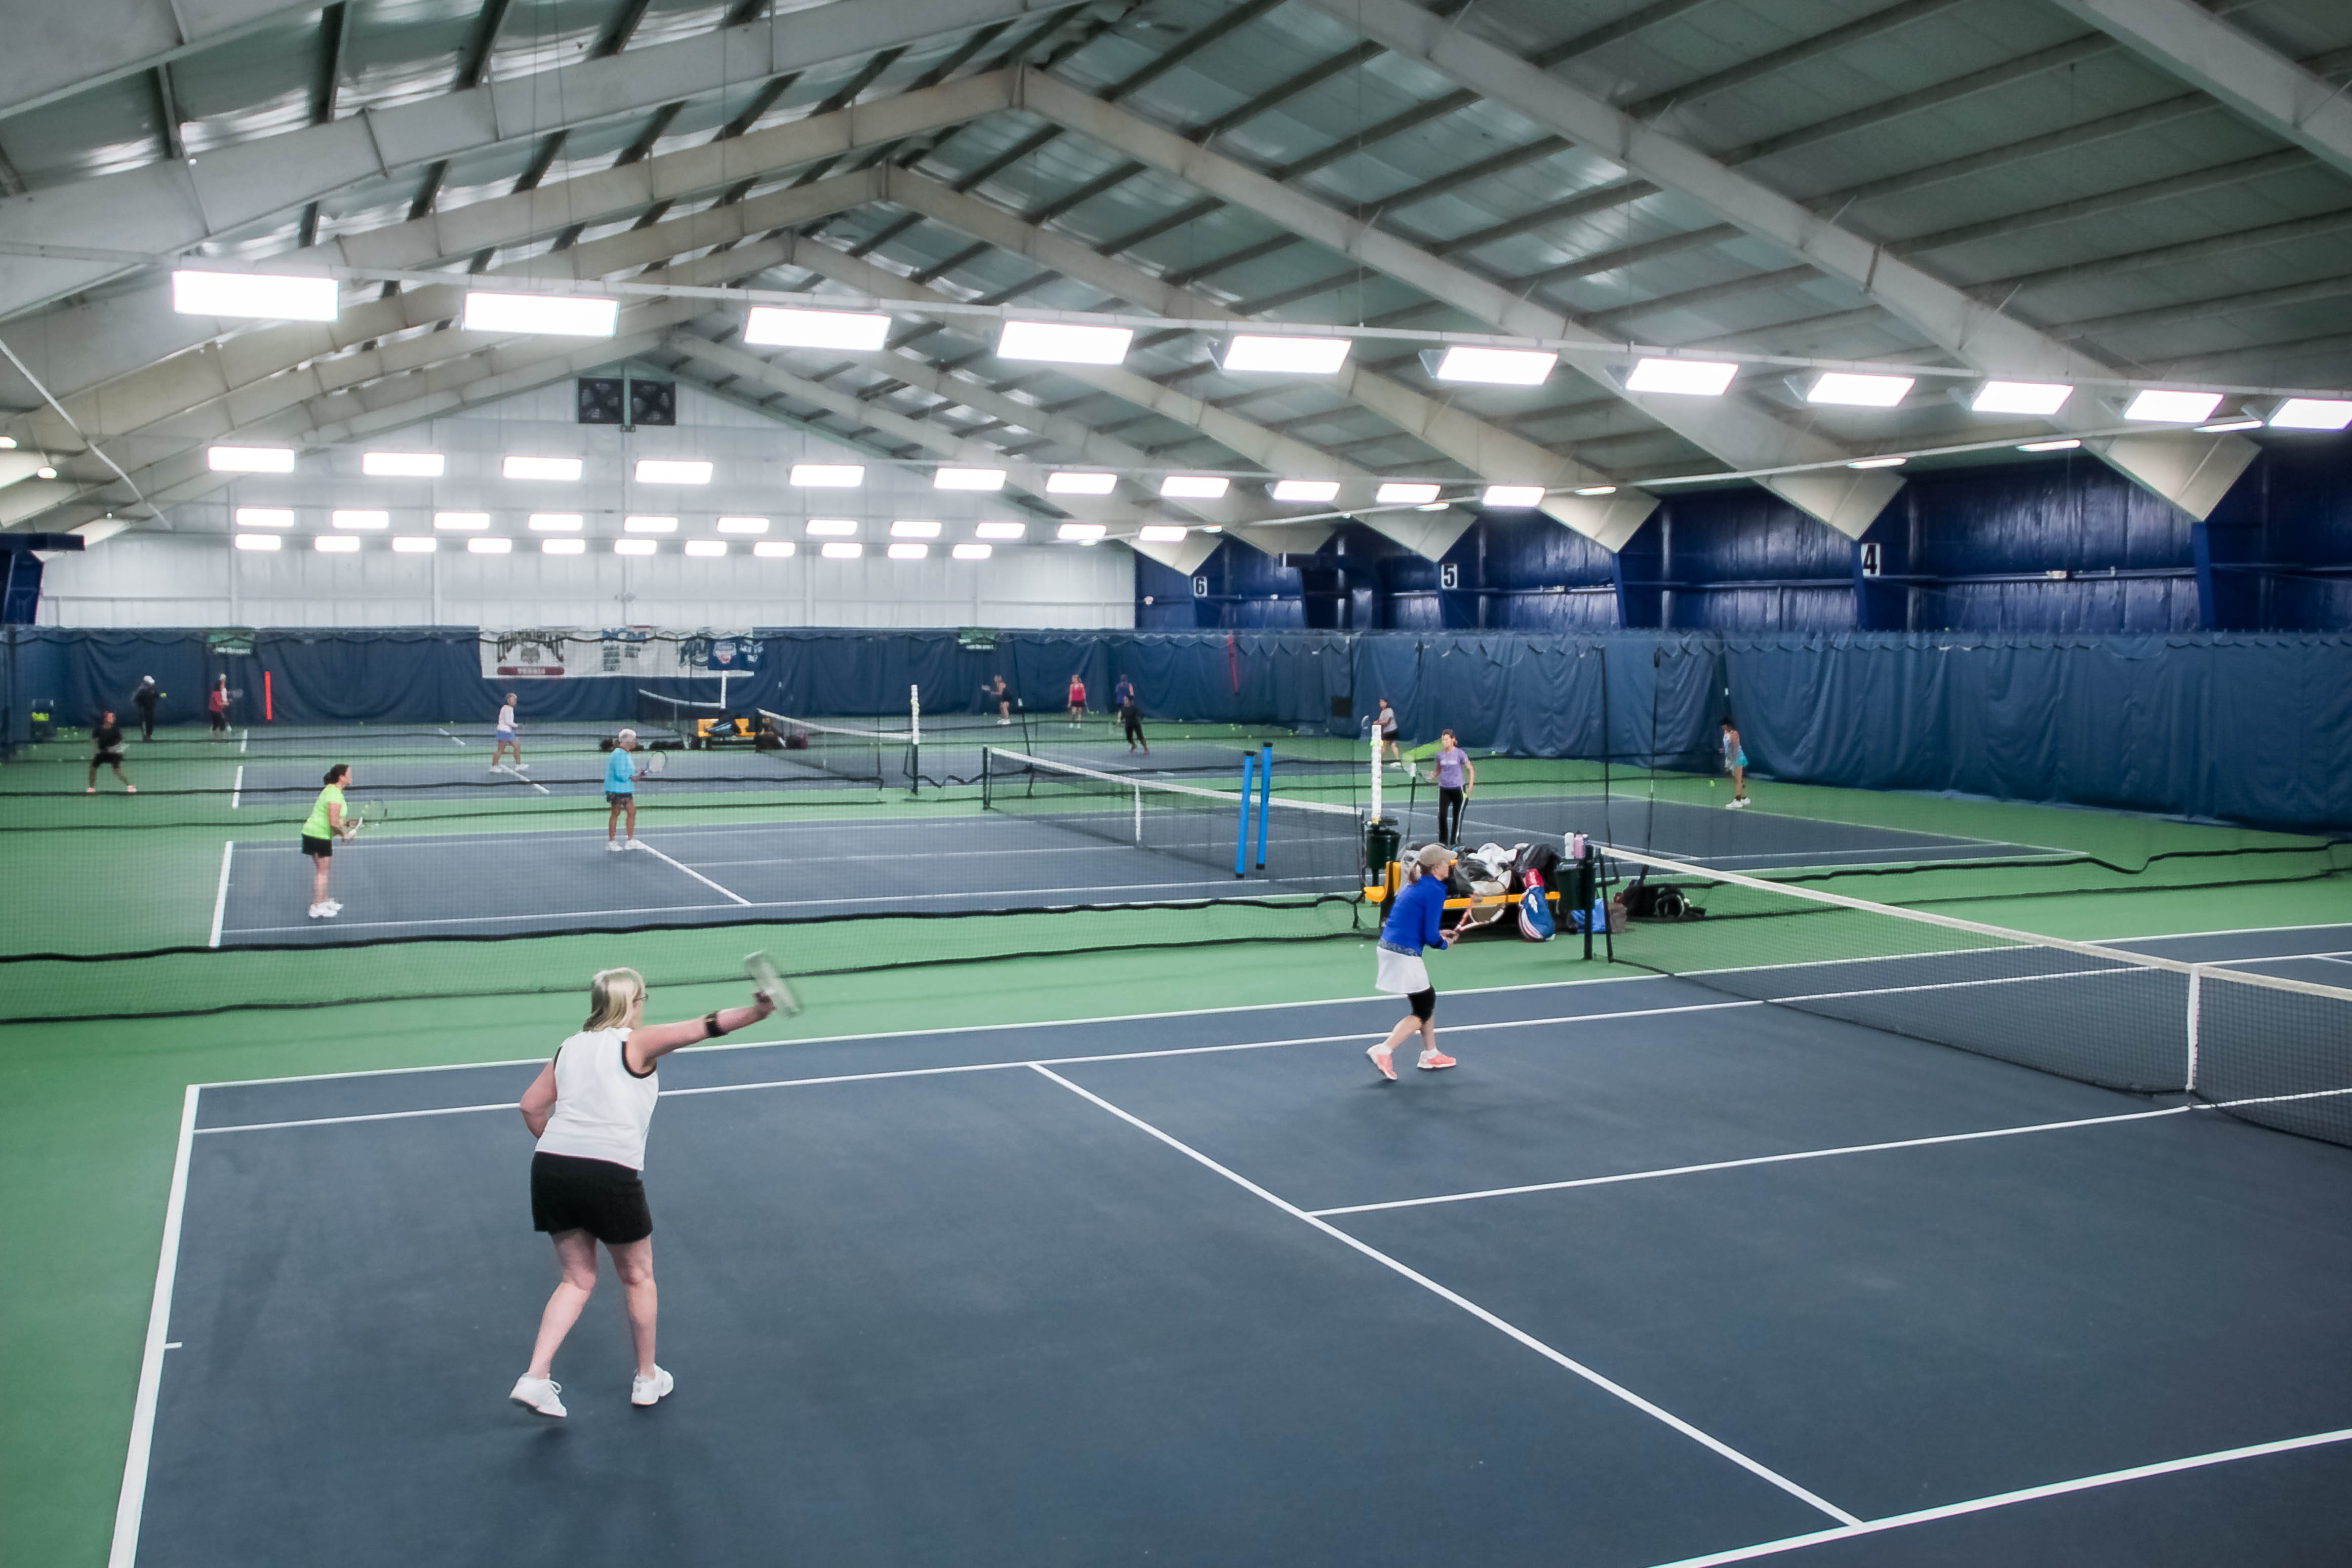 indoor tennis courts Cheaper Than Retail Price gt Buy Clothing